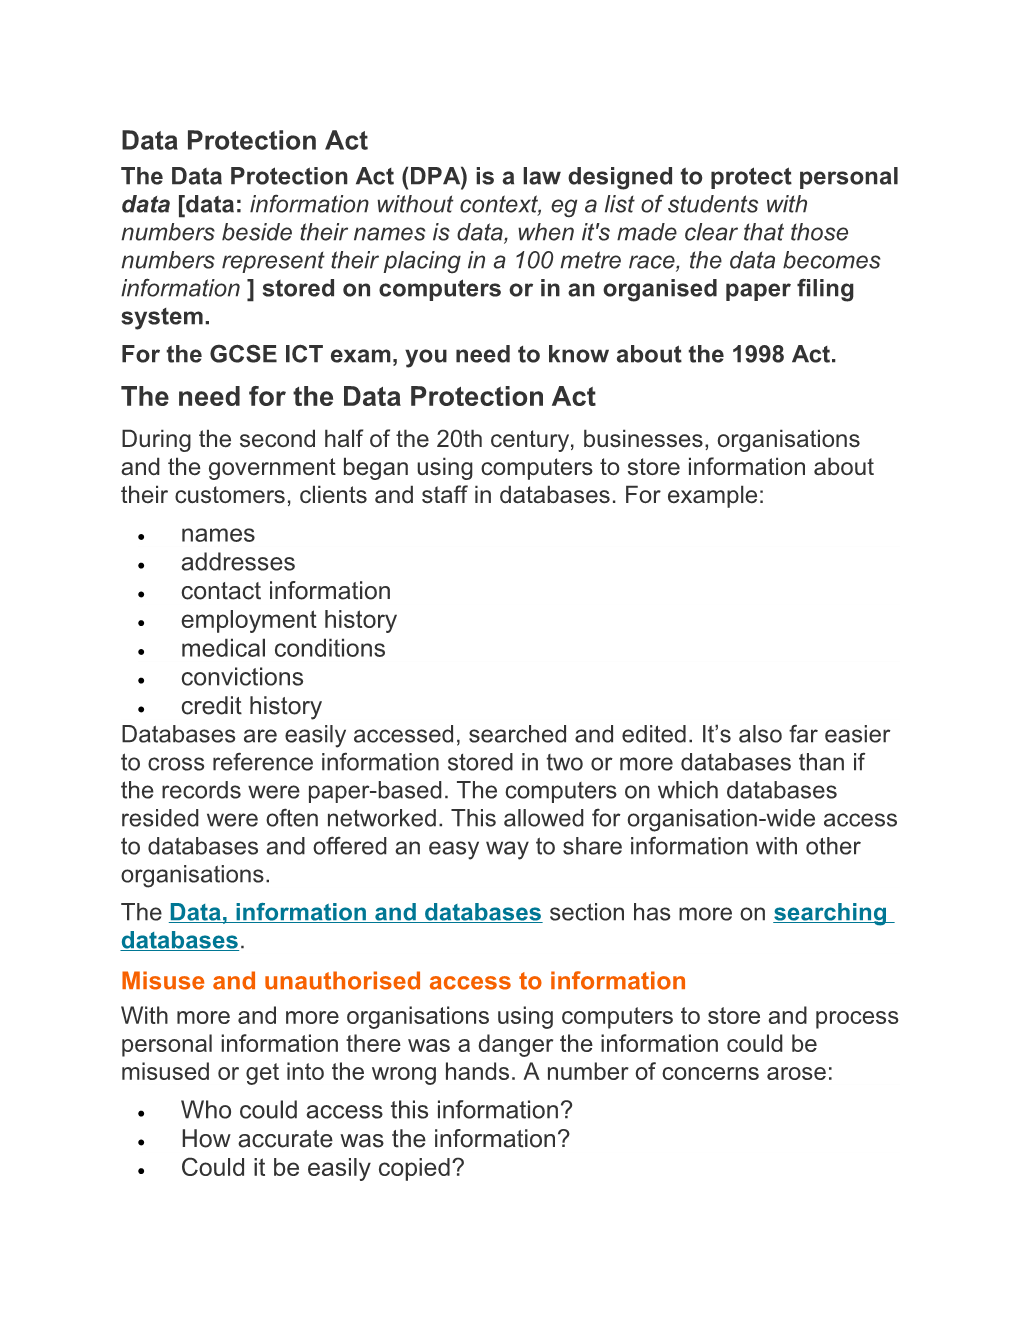 For the GCSE ICT Exam, You Need to Know About the 1998 Act